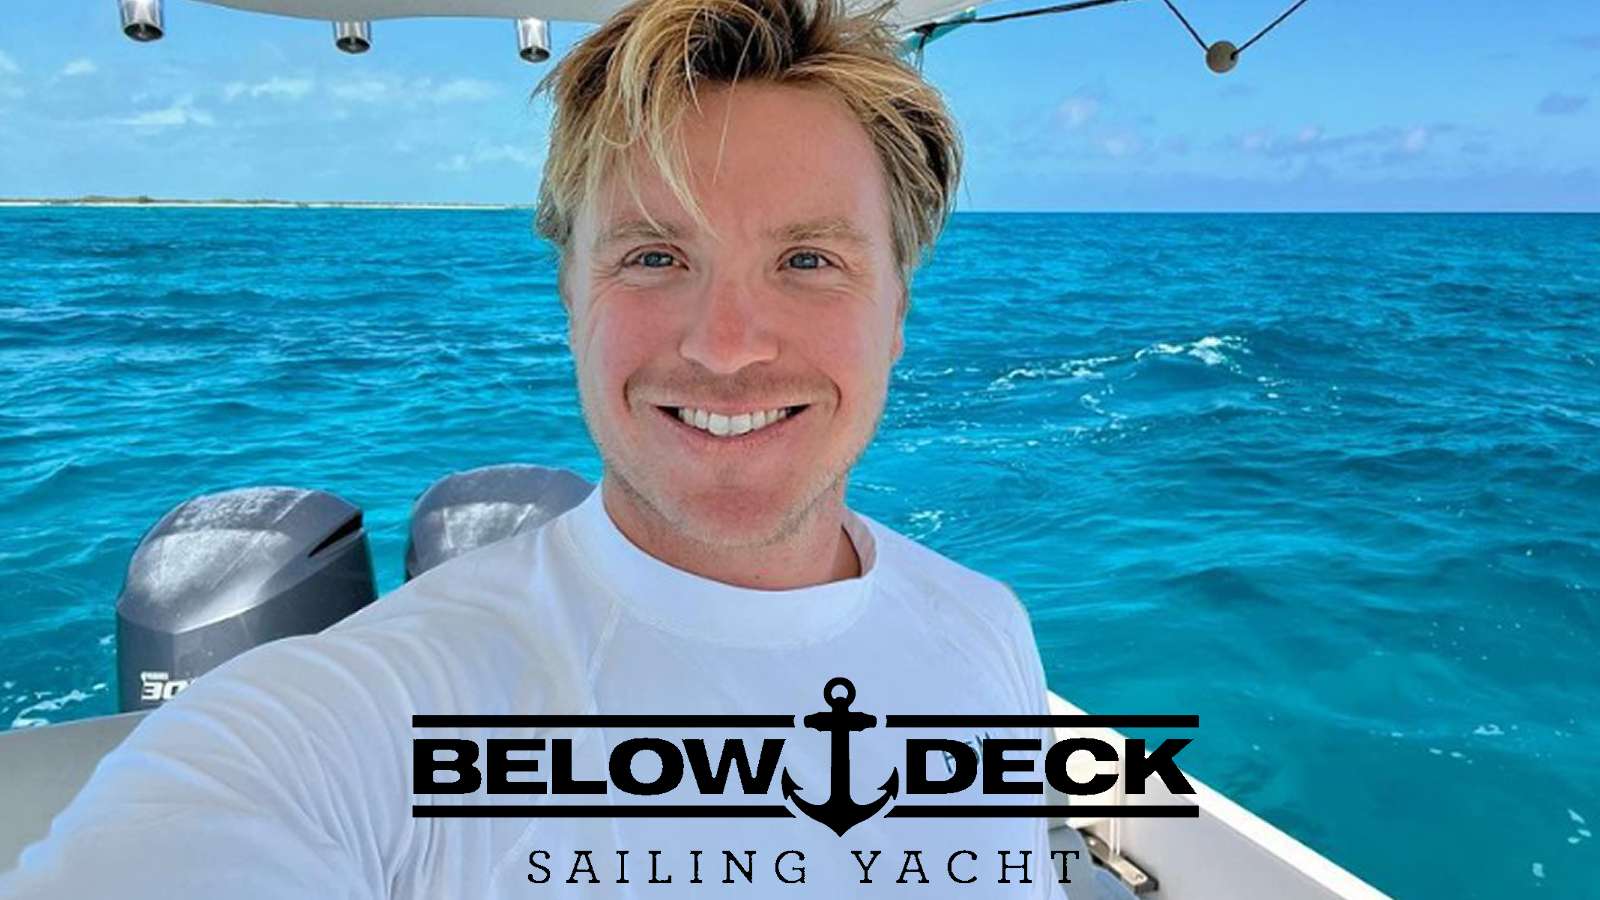 Below Deck’s Paget Berry reveals why he wouldn’t go back on the show